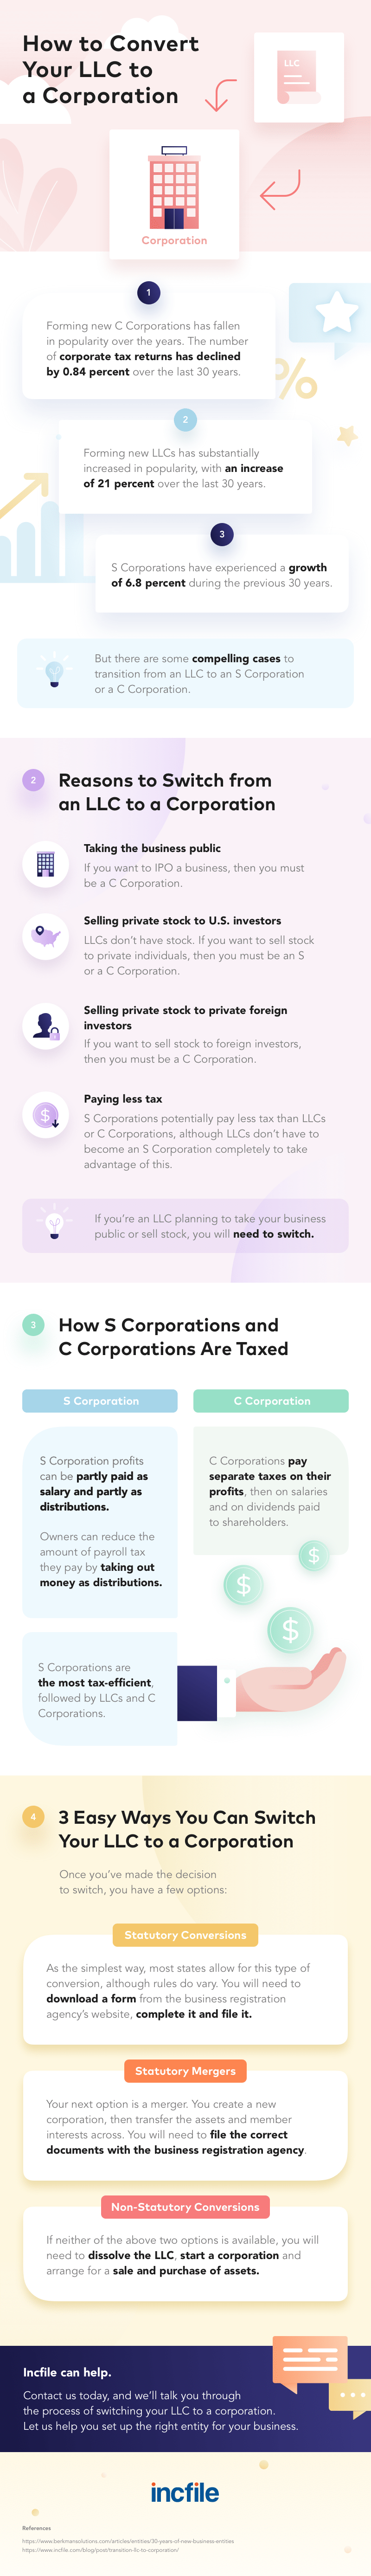 how to convert your LLC to a corporation